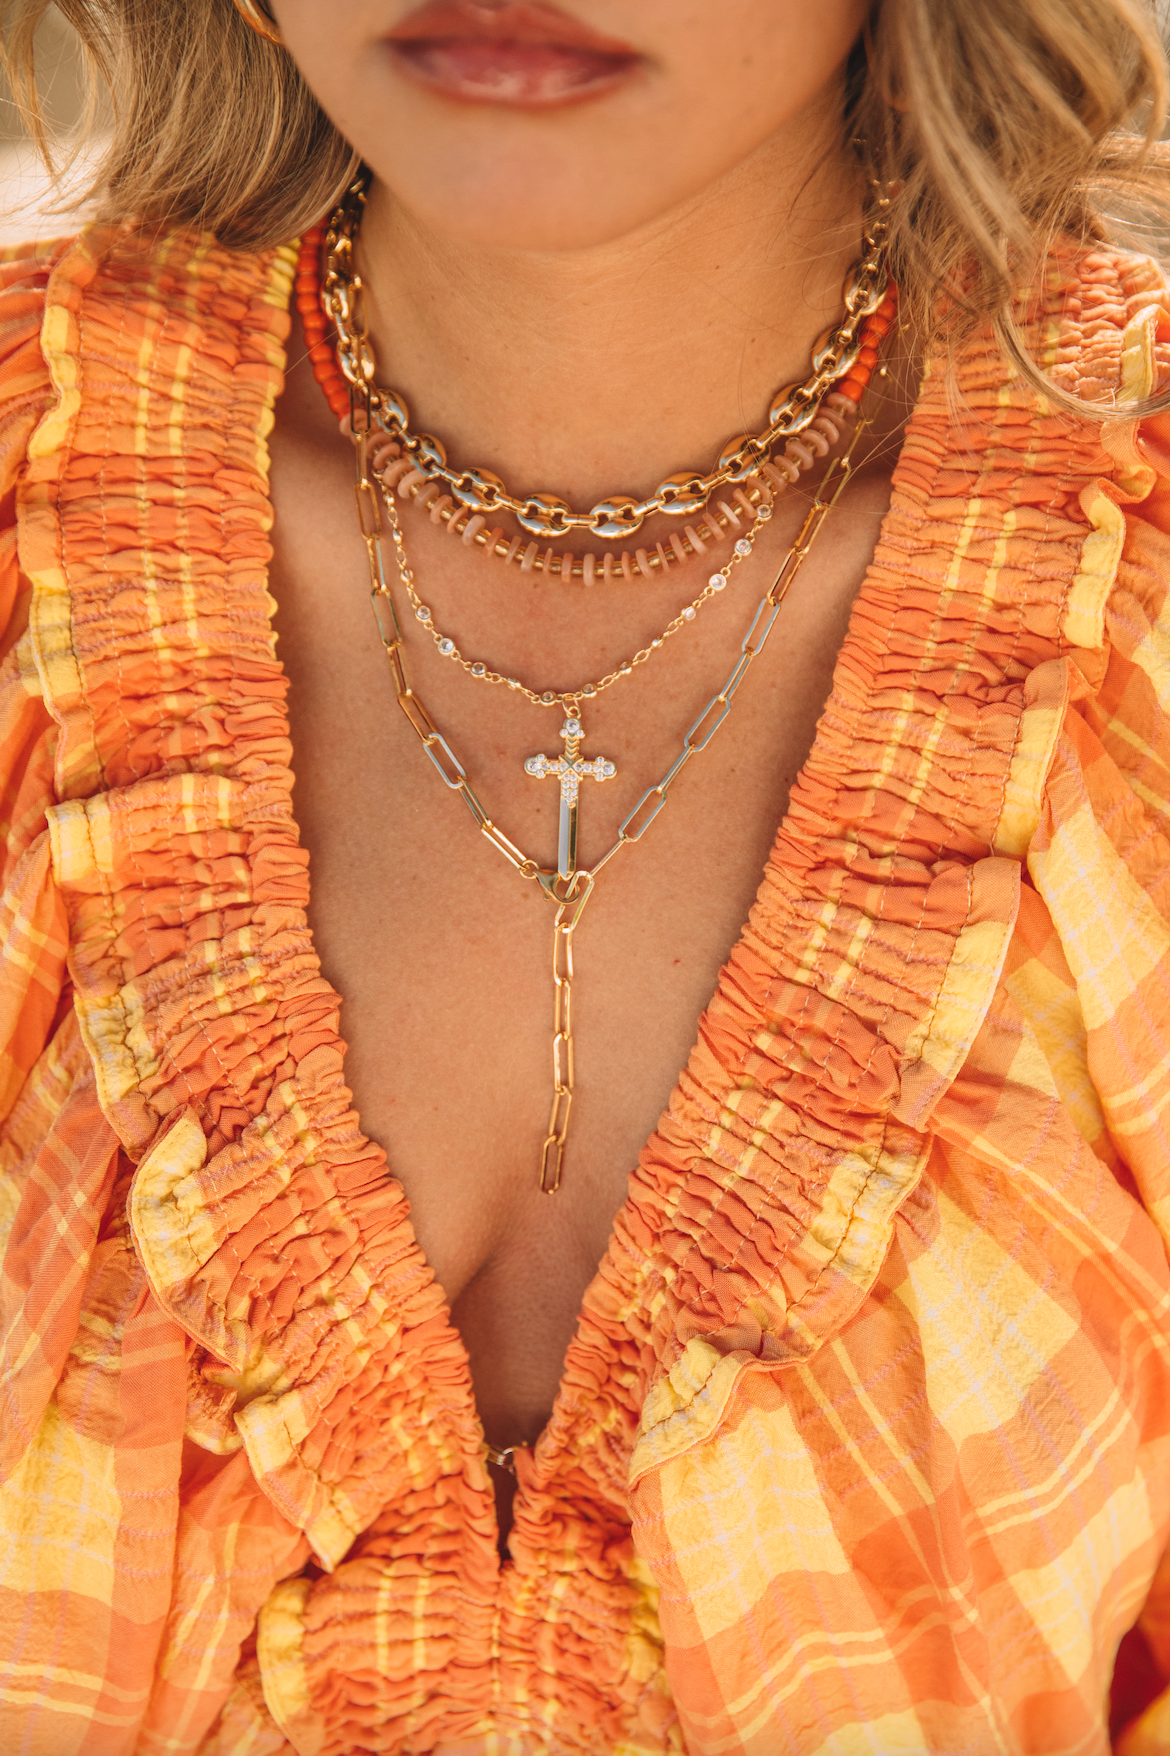 The Crystal Dagger Necklace